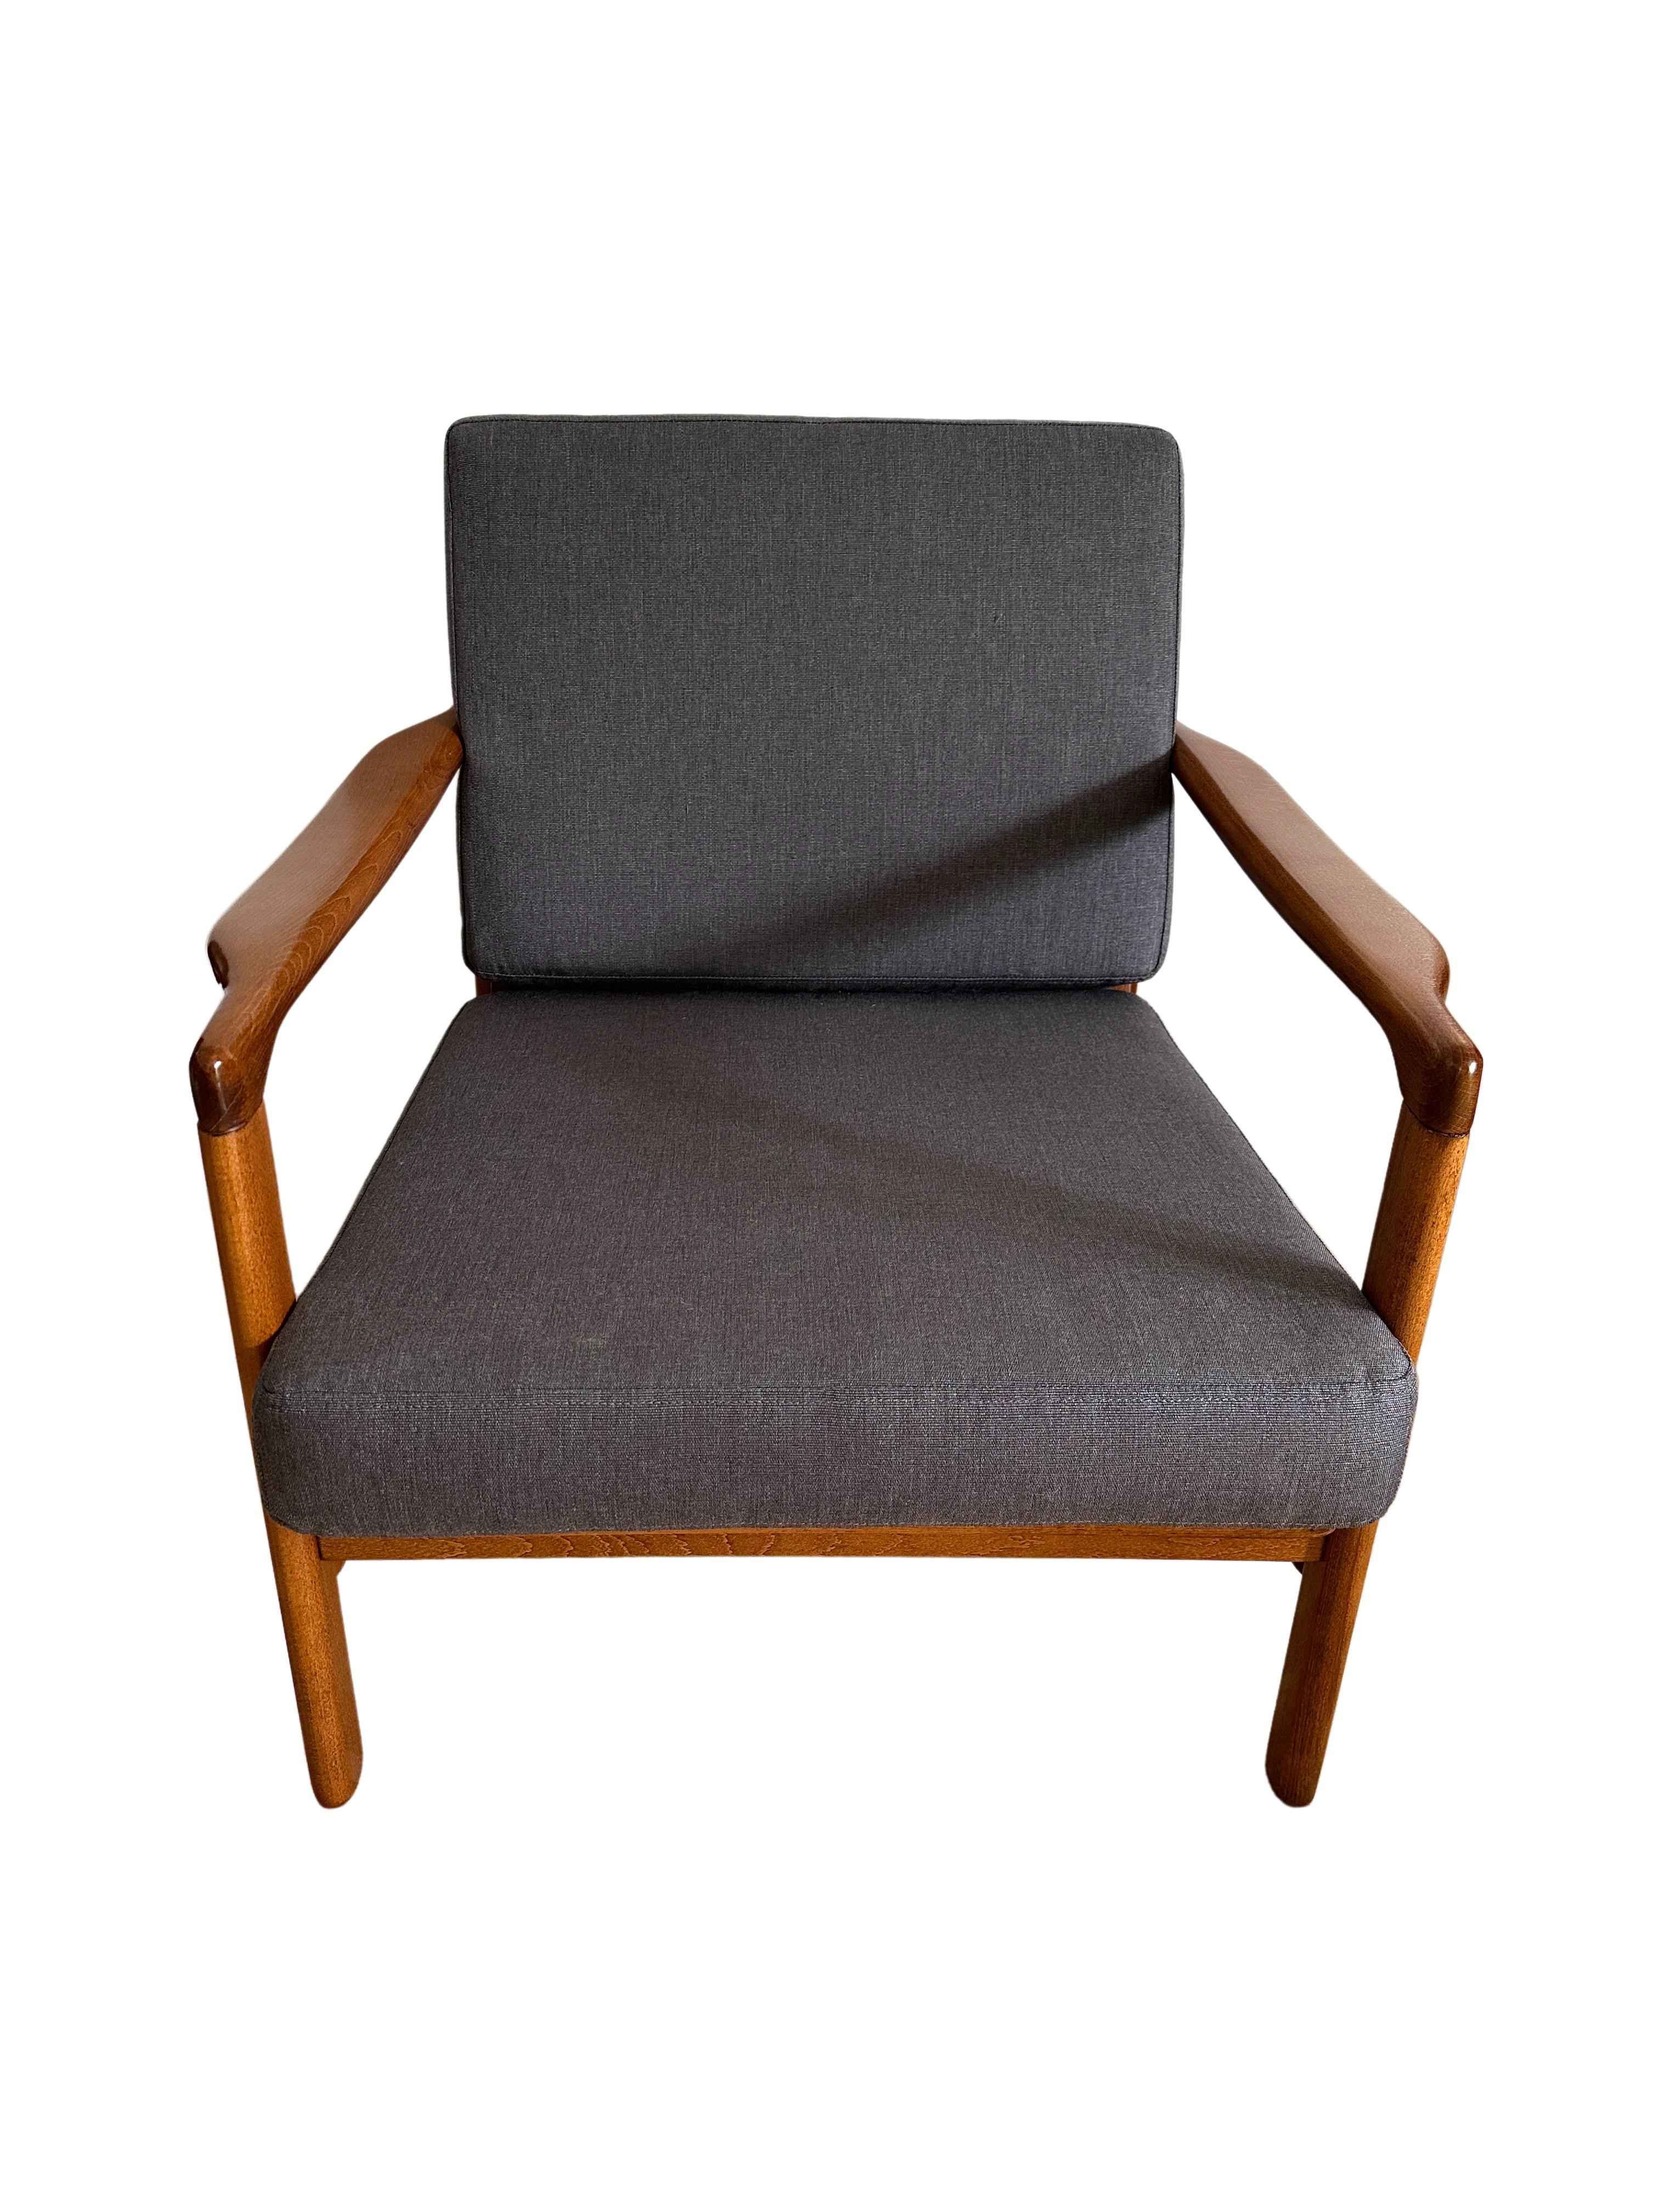 Set of Two Mid-Century Armchairs, Grey Kvadrat Upholstery, Europe, 1960s For Sale 3